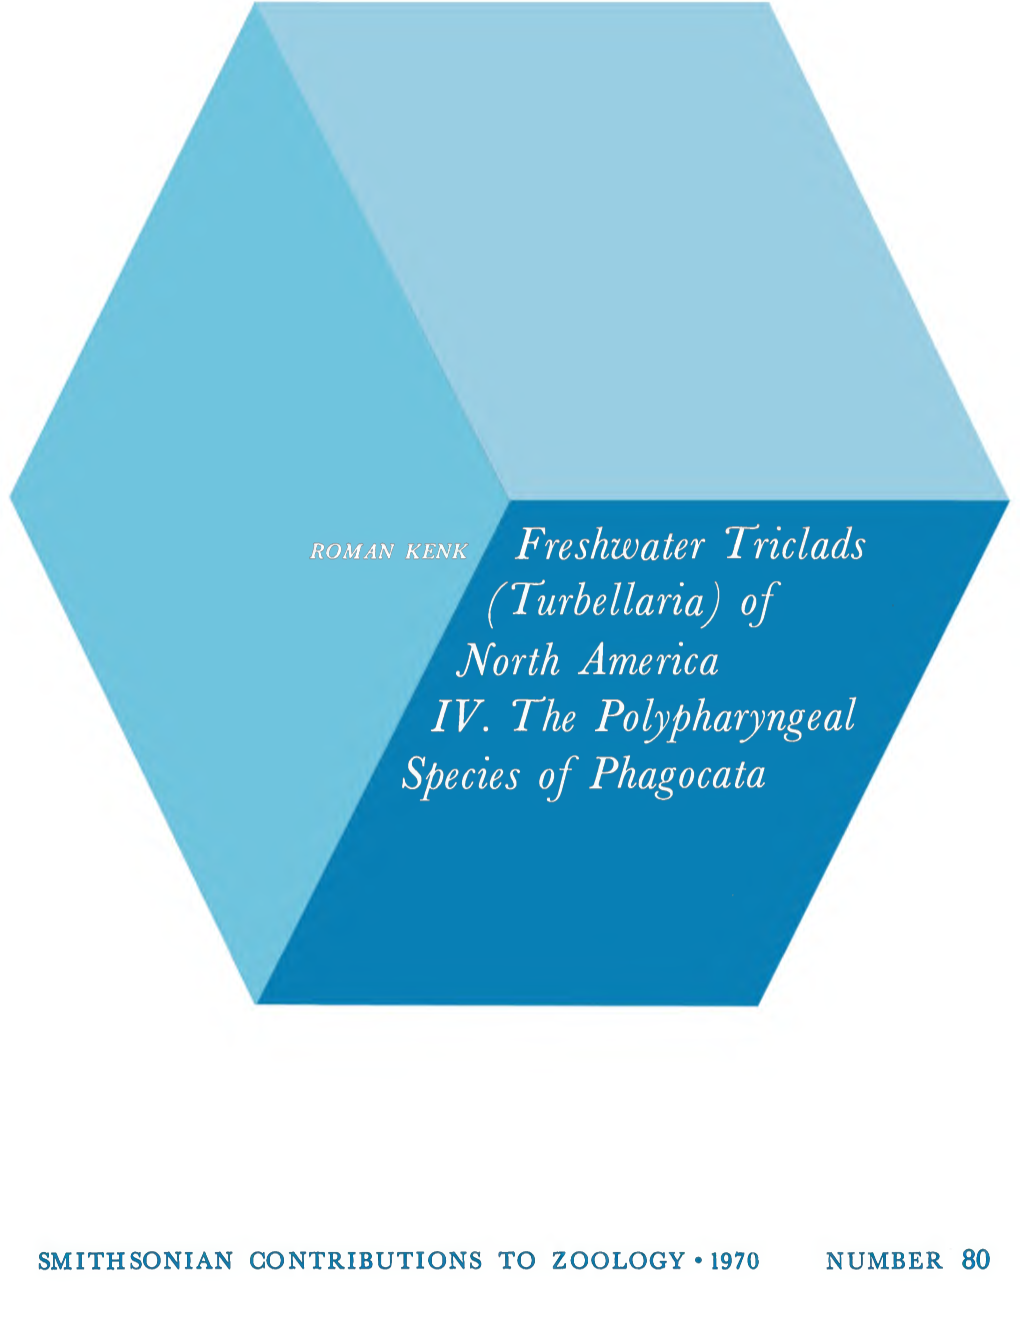 Freshwater Trie Lads (Turbellaria) of North America IV. the Polypharyngeal Species of Phagocata